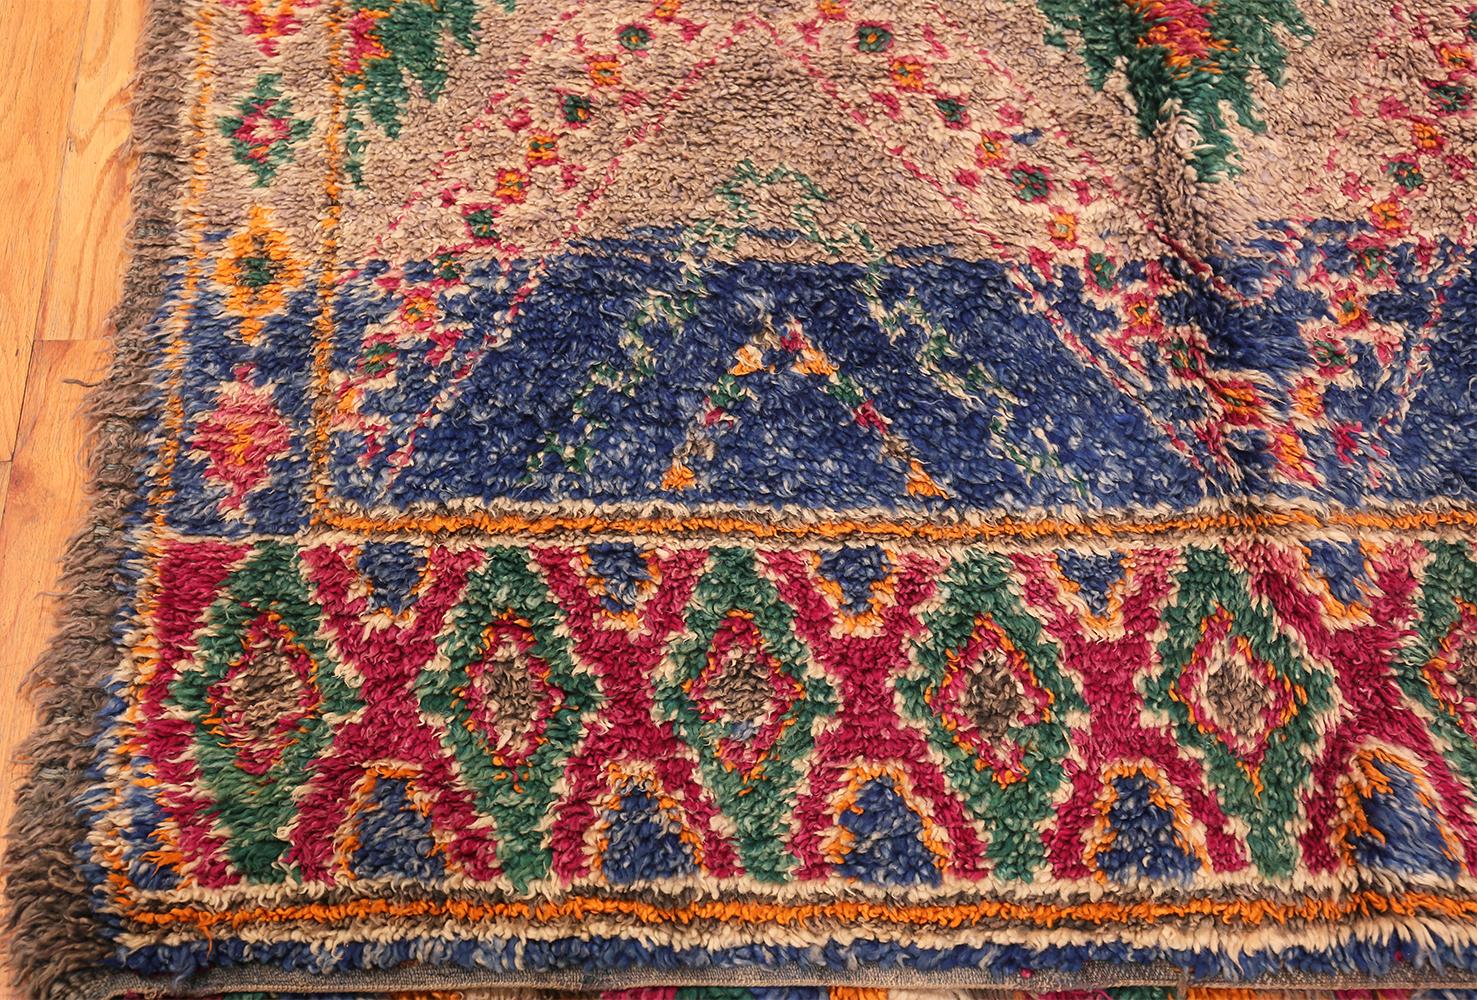 Tribal Vintage Folk Art Moroccan Rug. Size: 6 ft. 10 in x 14 ft. (2.08 m x 4.27 m) For Sale